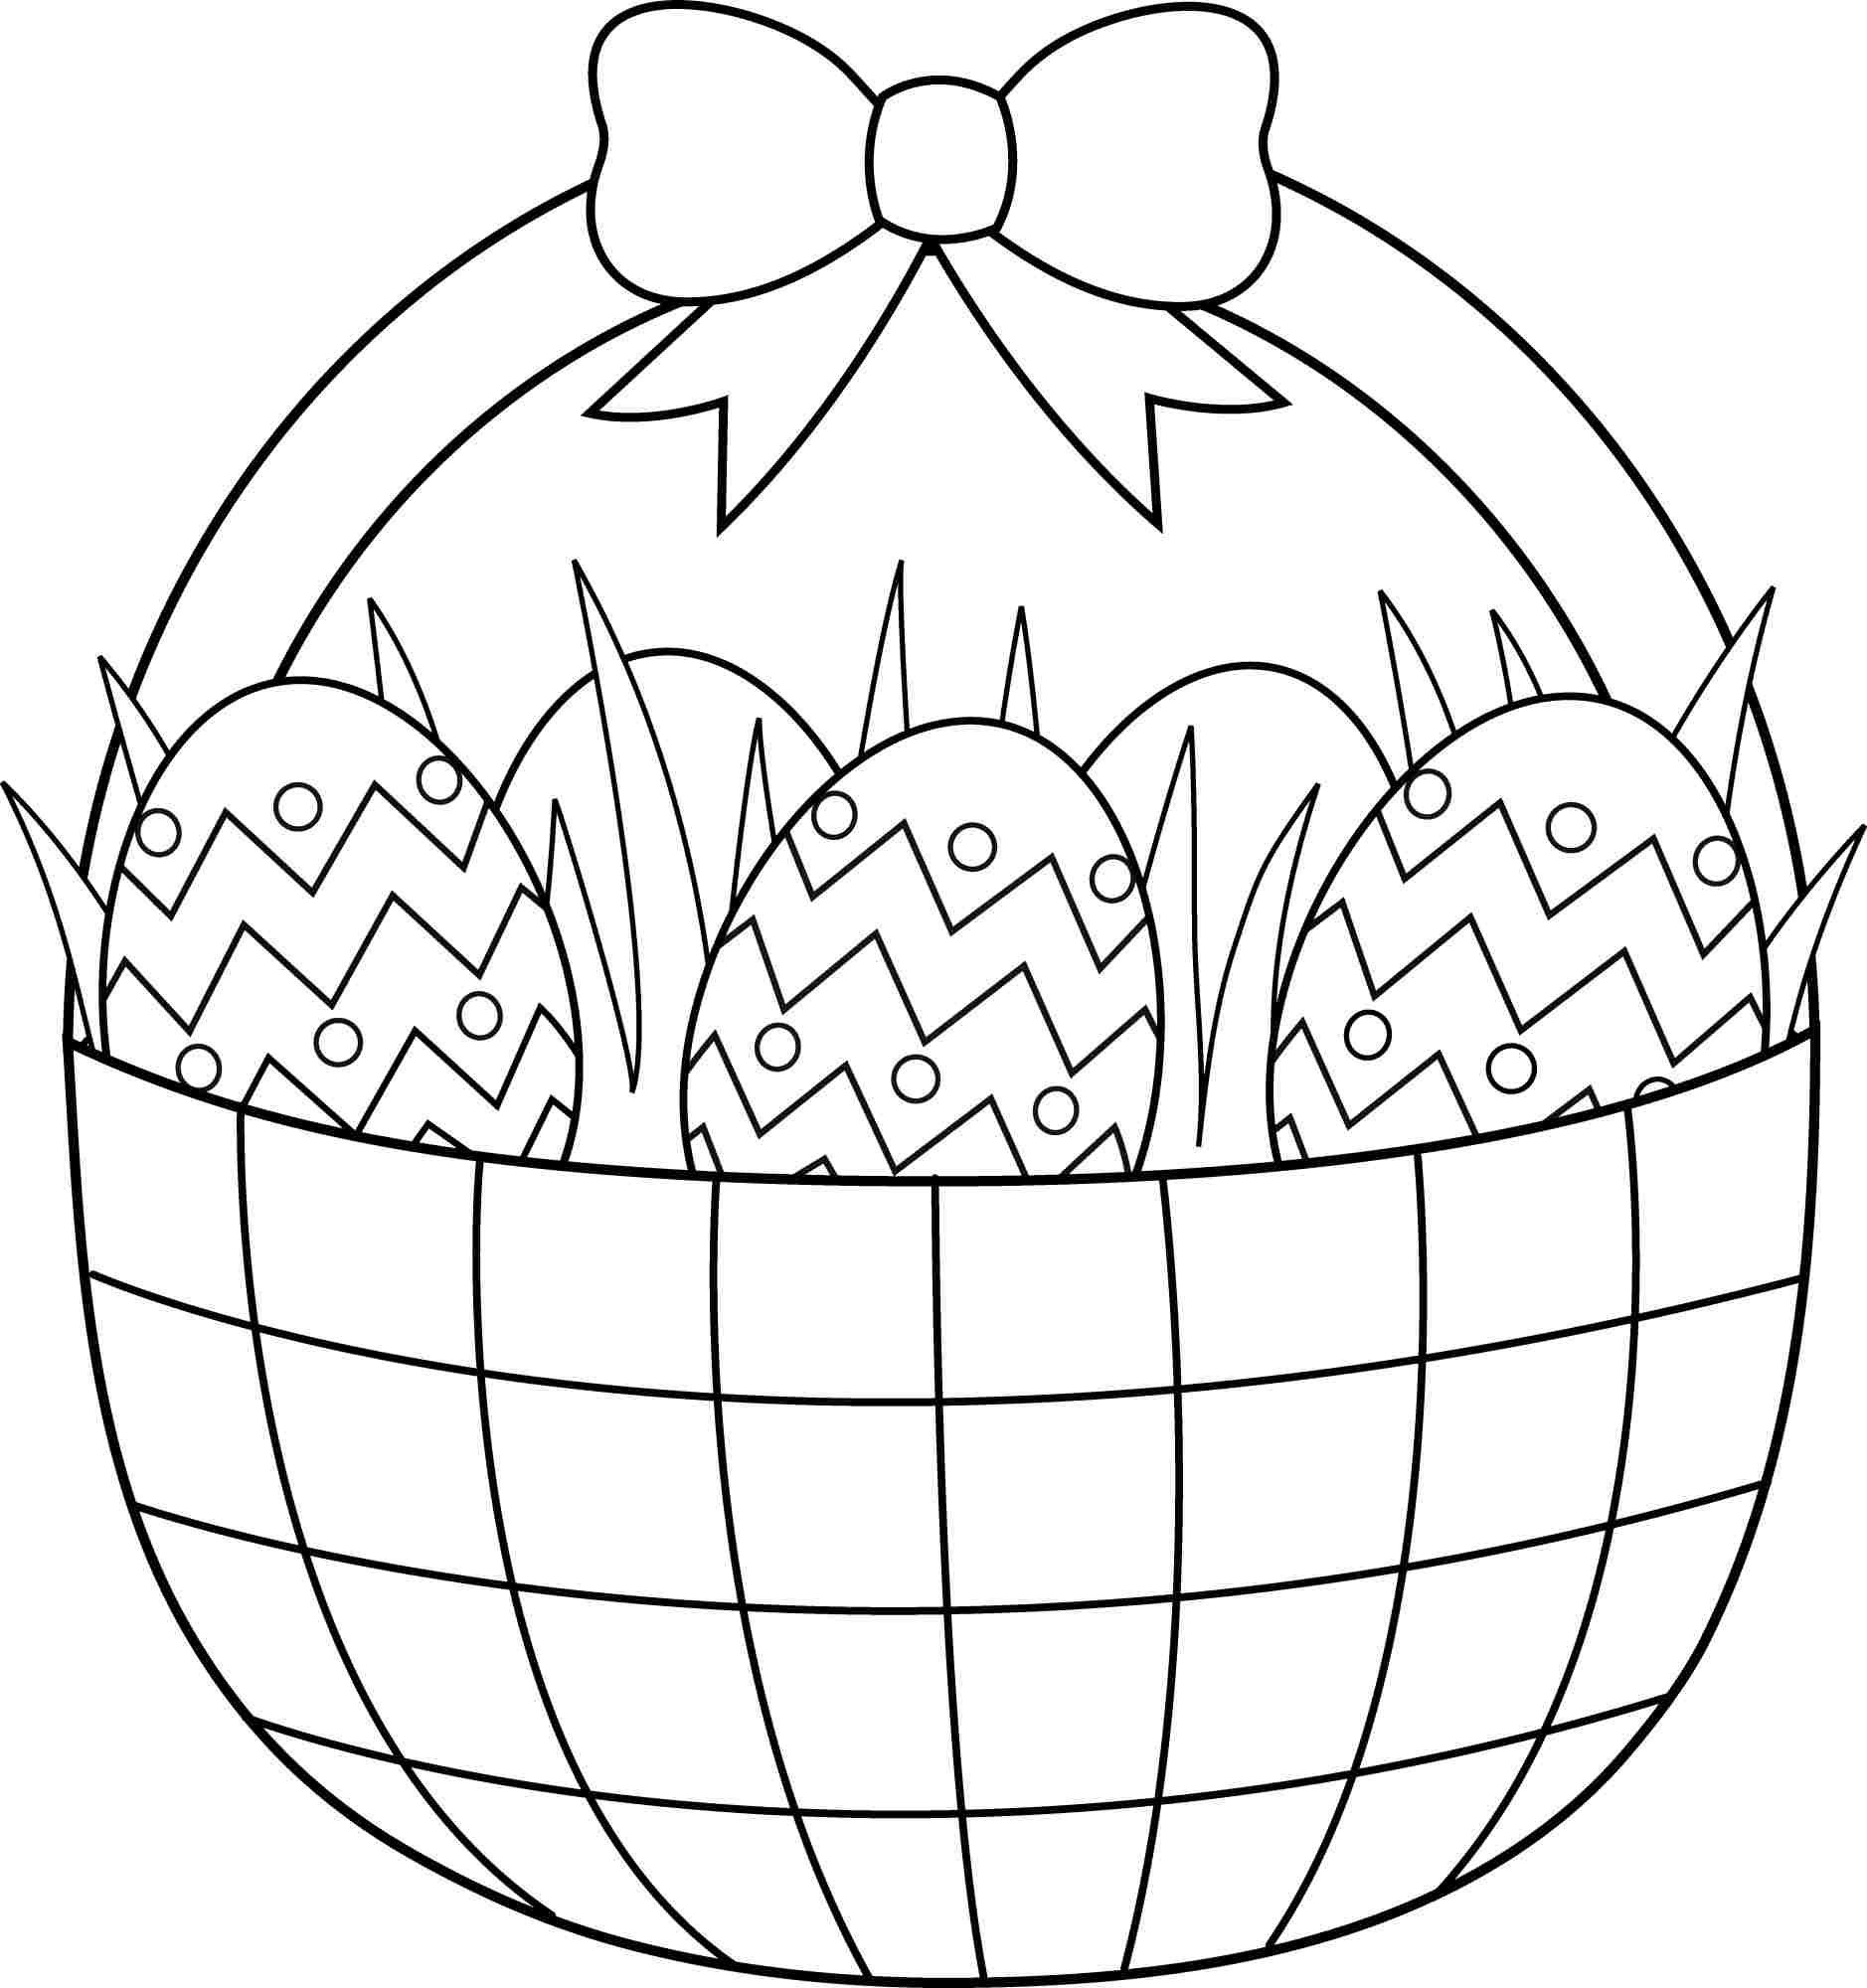 Color Code Coloring Page Easter - Ð¡oloring Pages For All Ages